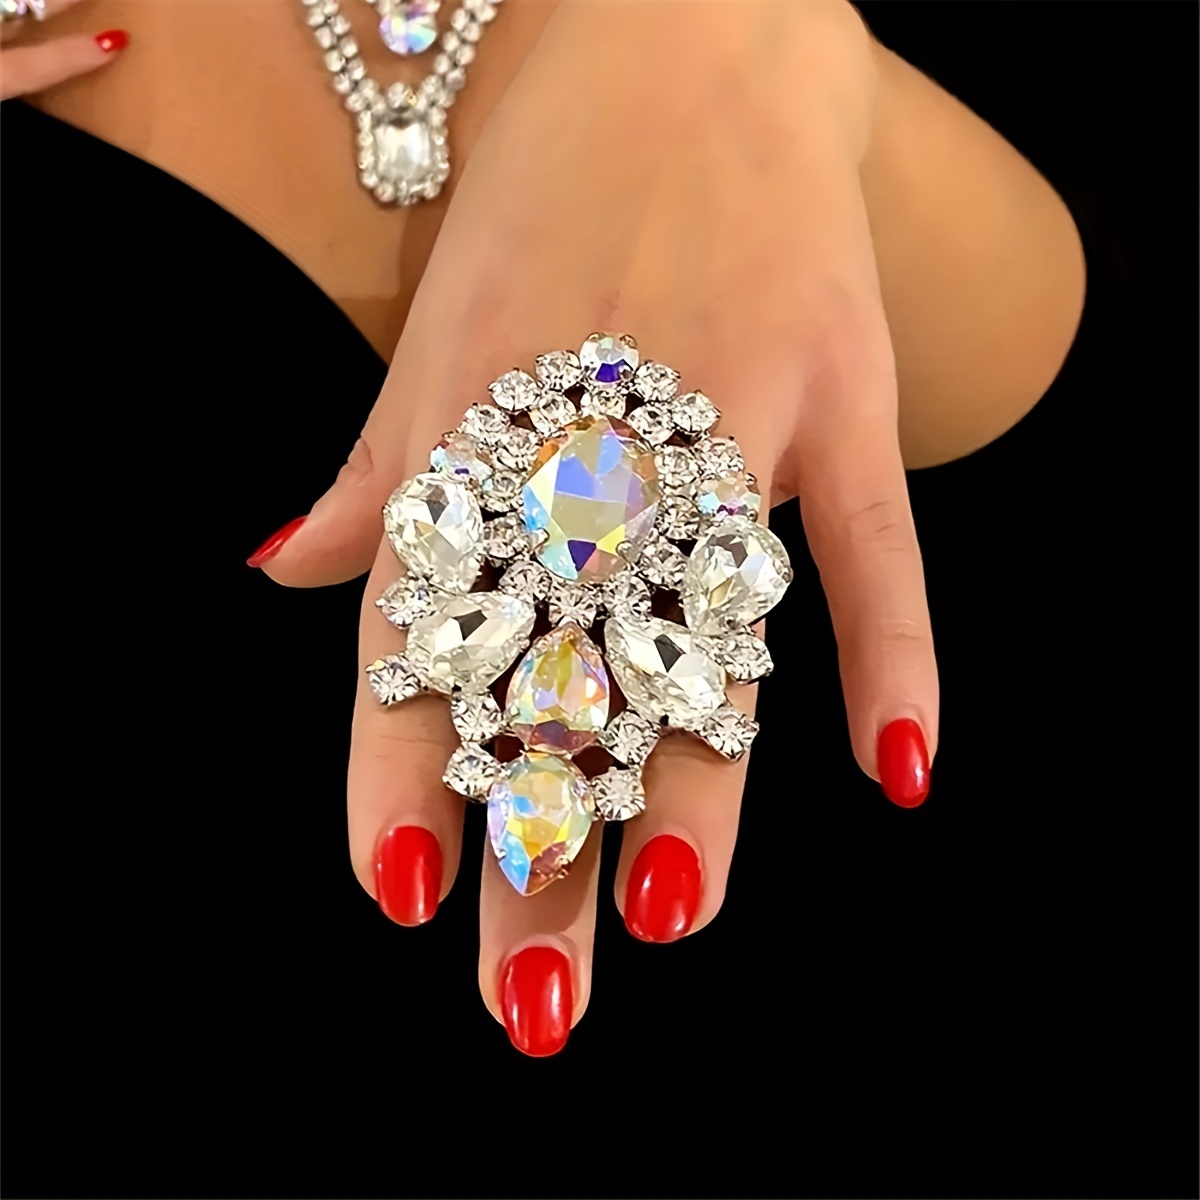 

Exaggerated Ring Sparkling Flower Design Paved Shining Rhinestone Silvery Or Golden Make Your Call Stunning Party Accessory Adjustable Jewelry